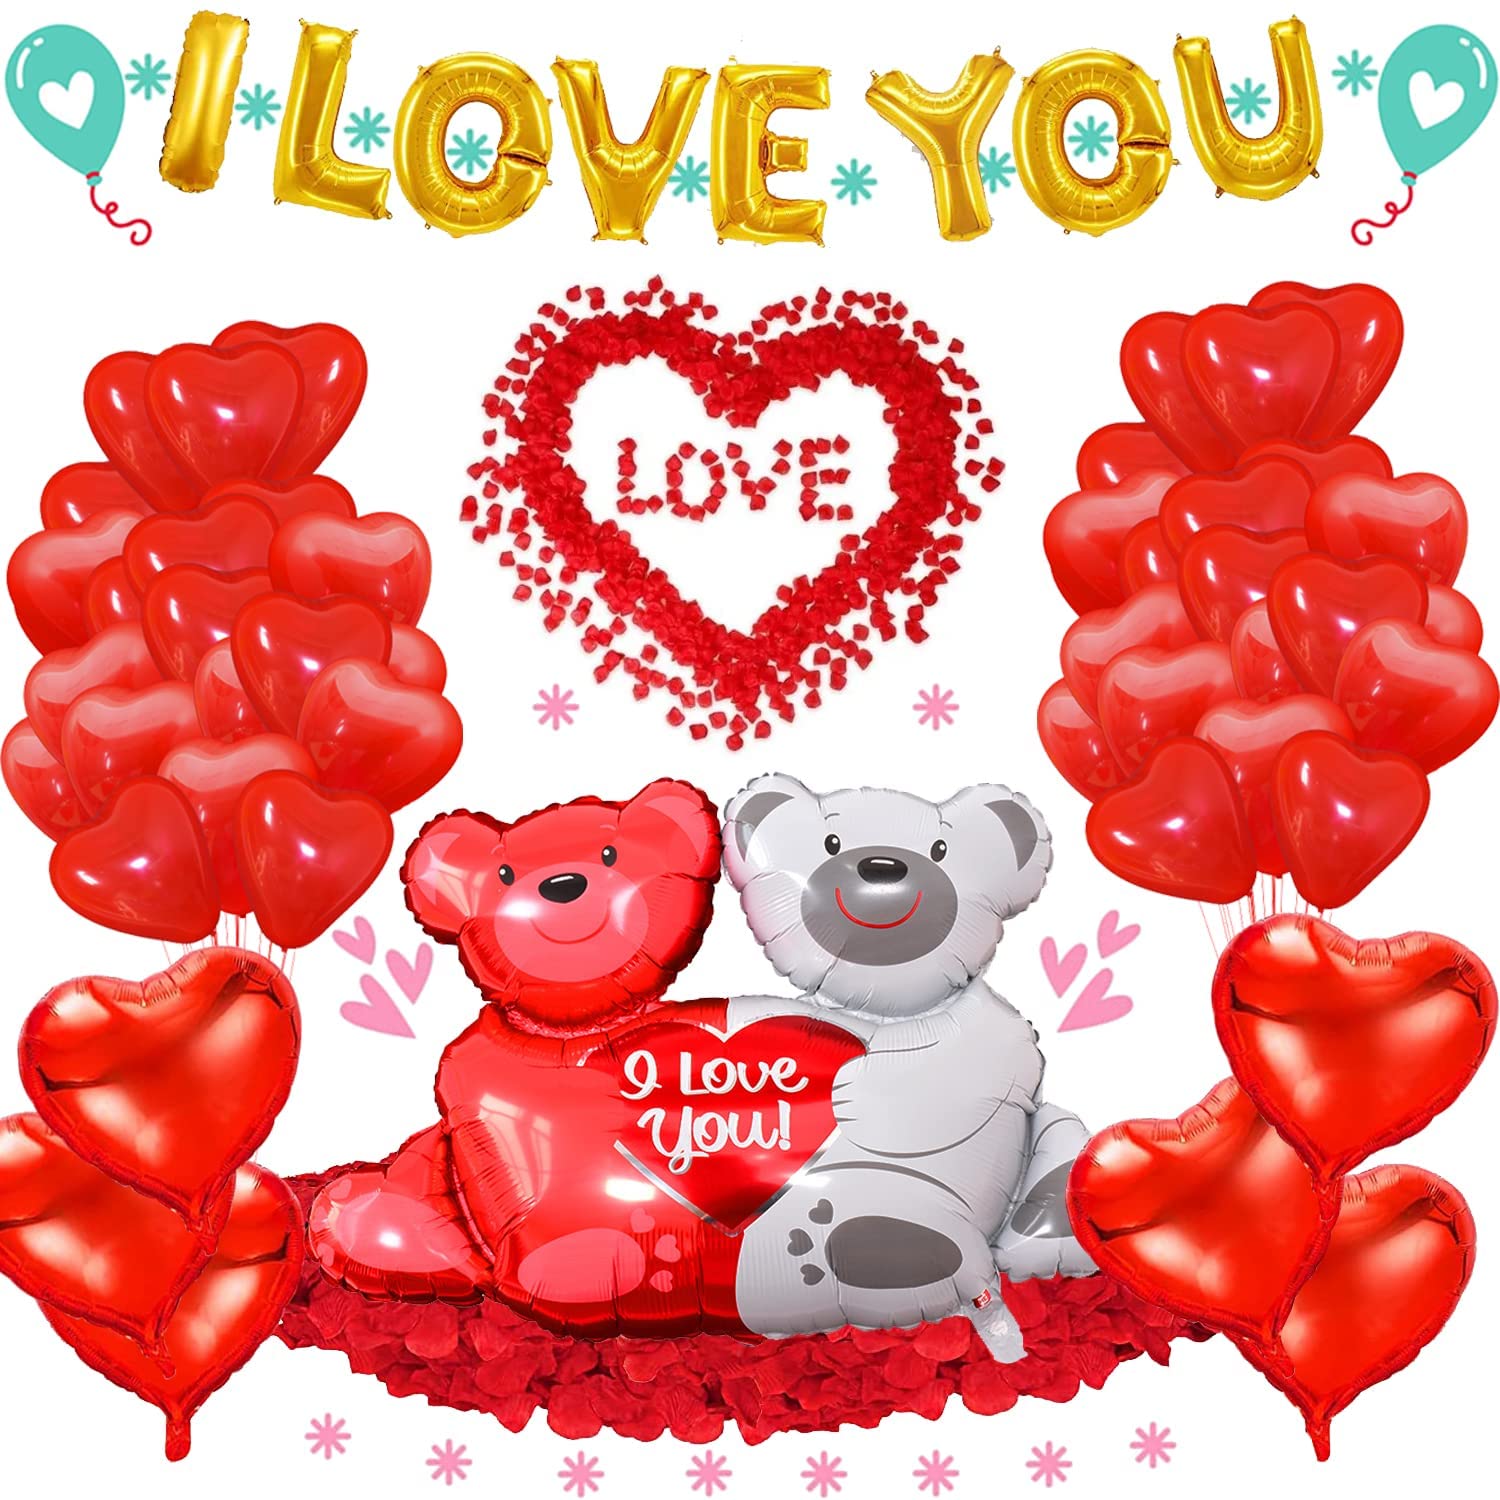 Valentines Day Balloons Decorations I Love You Balloons and Heart Balloons  Kit with 1000Pcs Red Silk Rose Petals Flower Decoration Love-Bear Heart